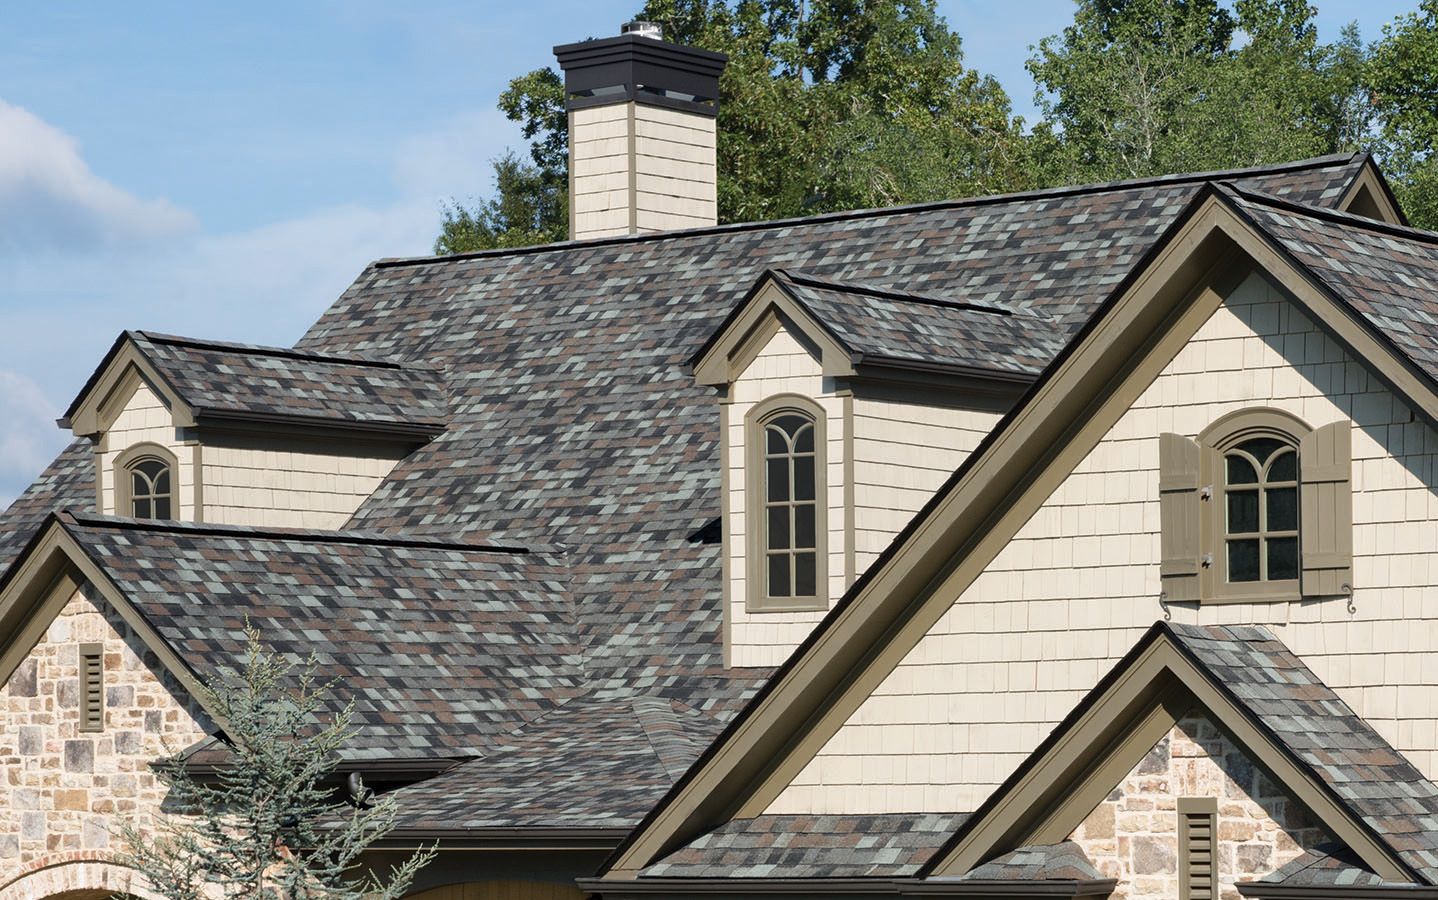 Different colored shingles on roof